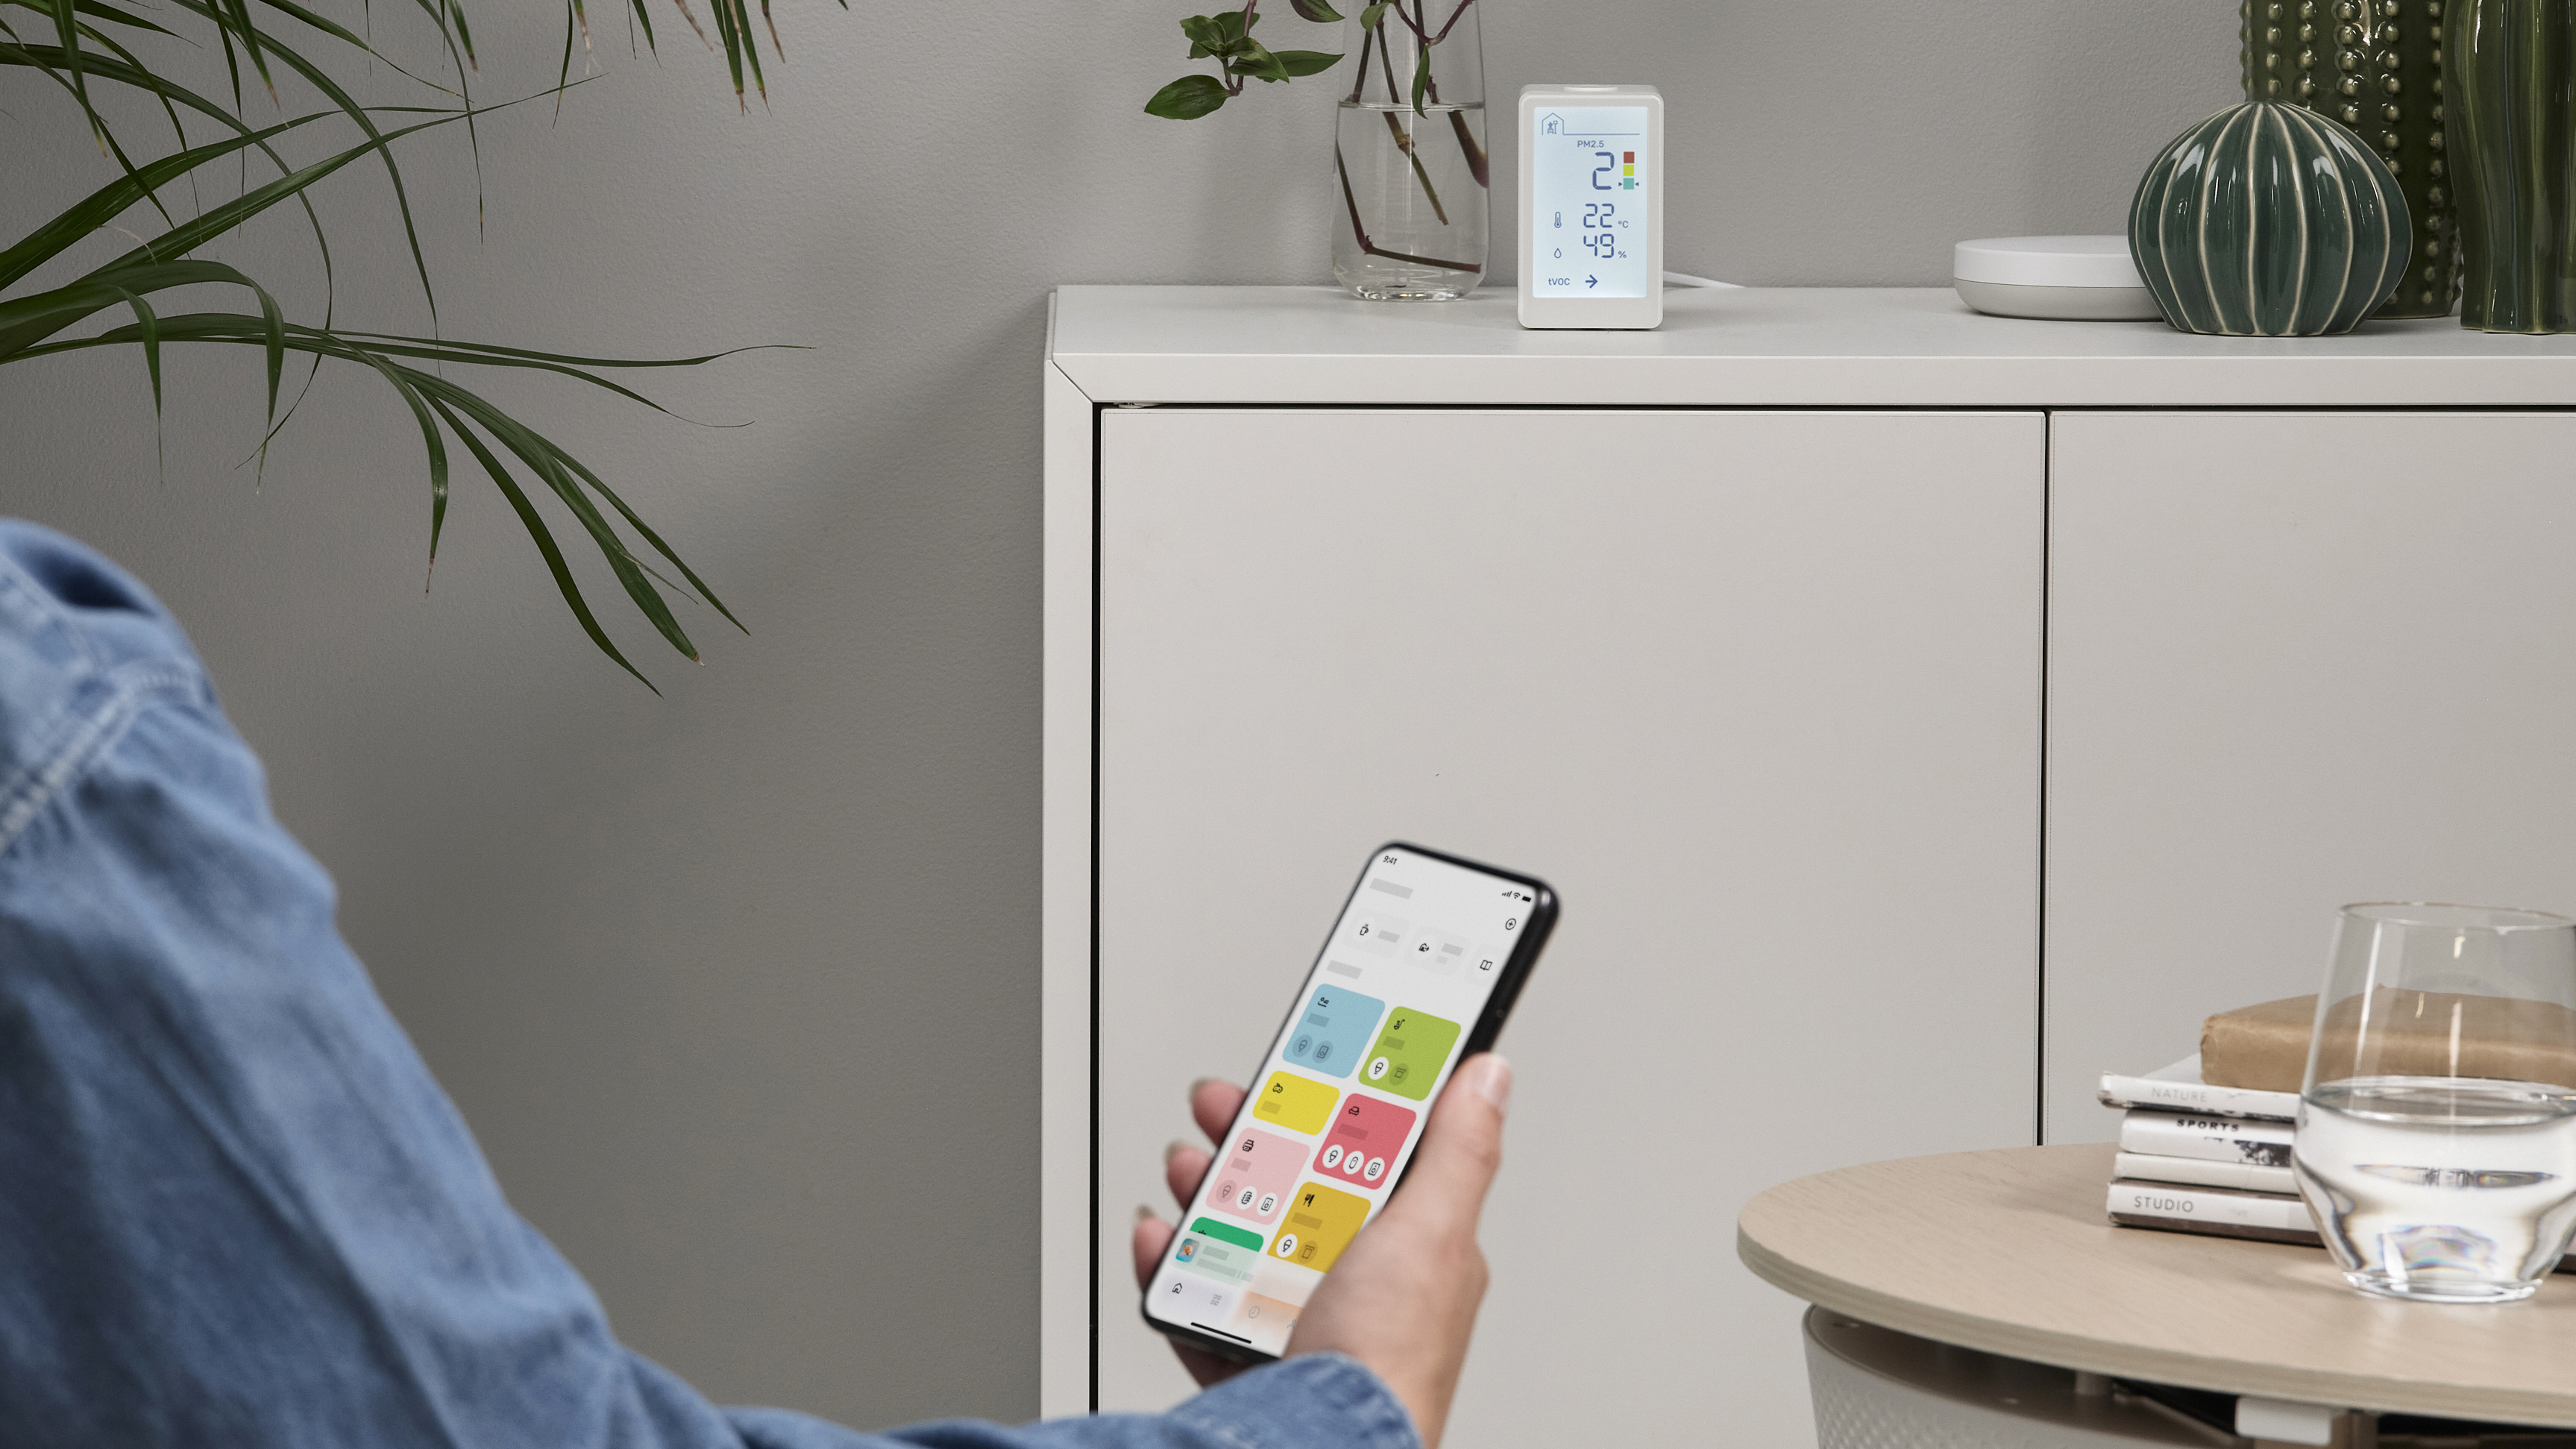 The IKEA VINDSTYRKA smart air quality monitor on a table